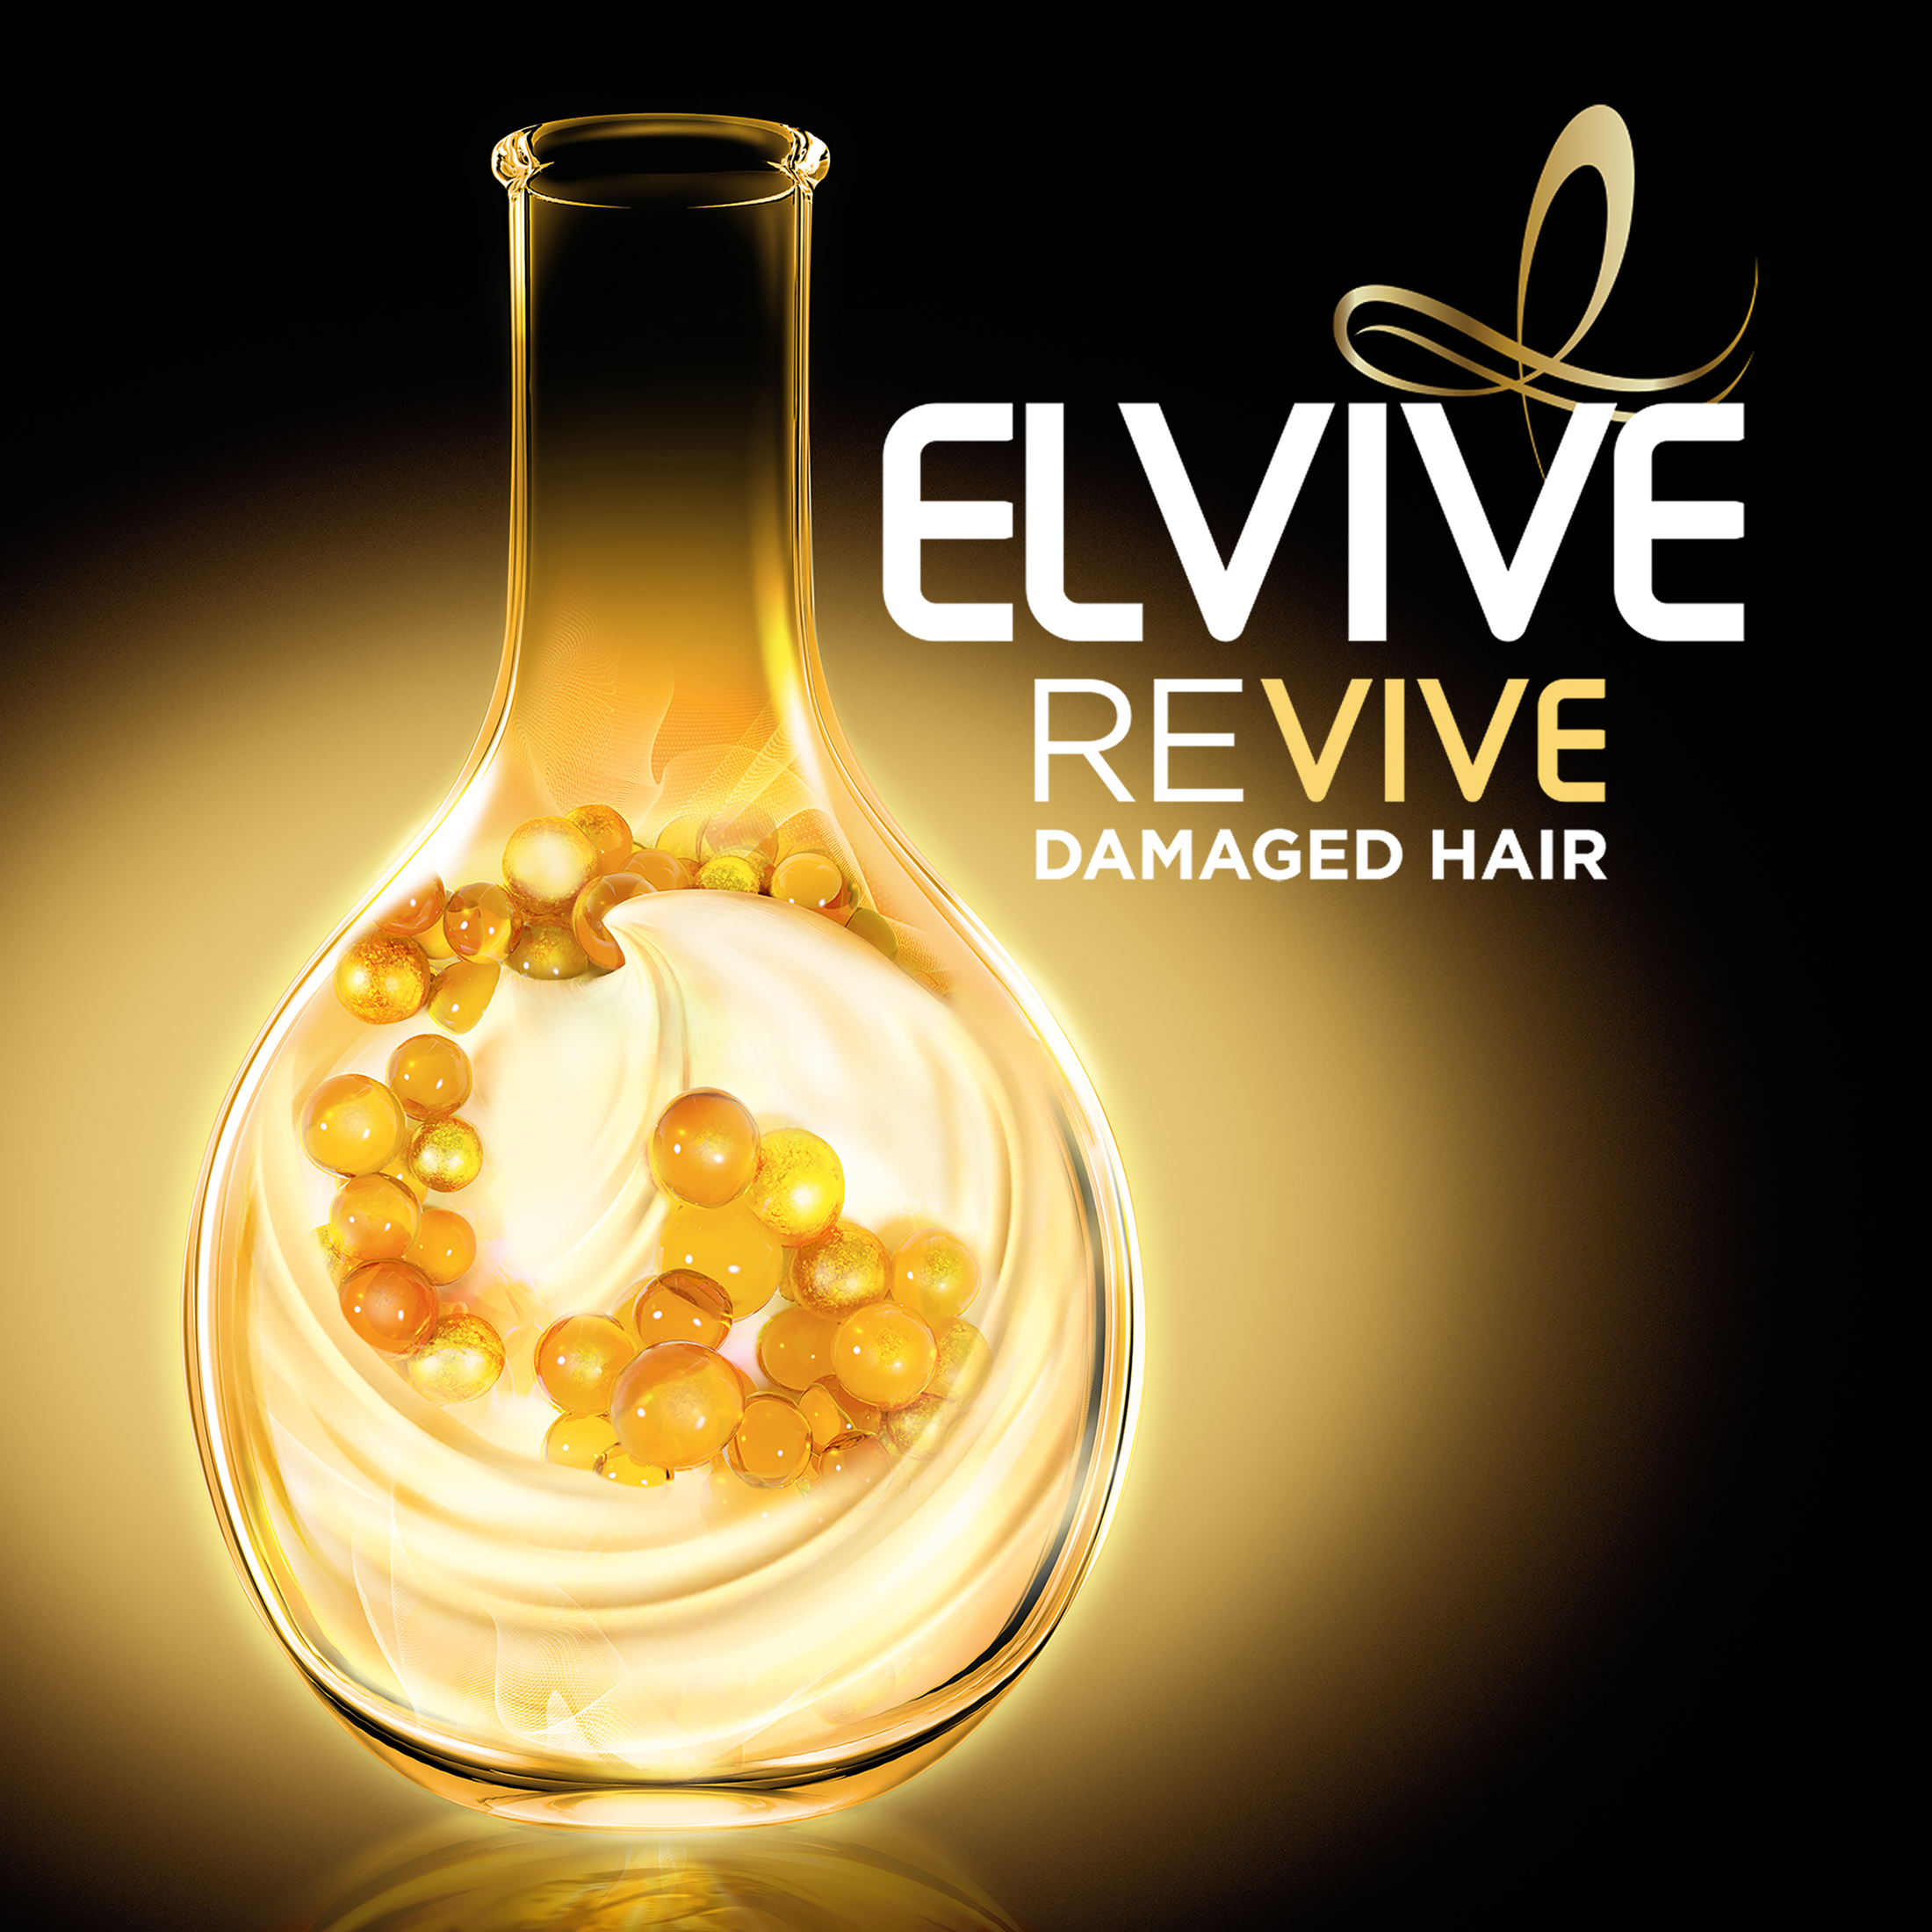 L'Oreal Elvive Total Repair Extreme Renewing Conditioner with Wheat Protein, 12.6 fl oz - image 4 of 5